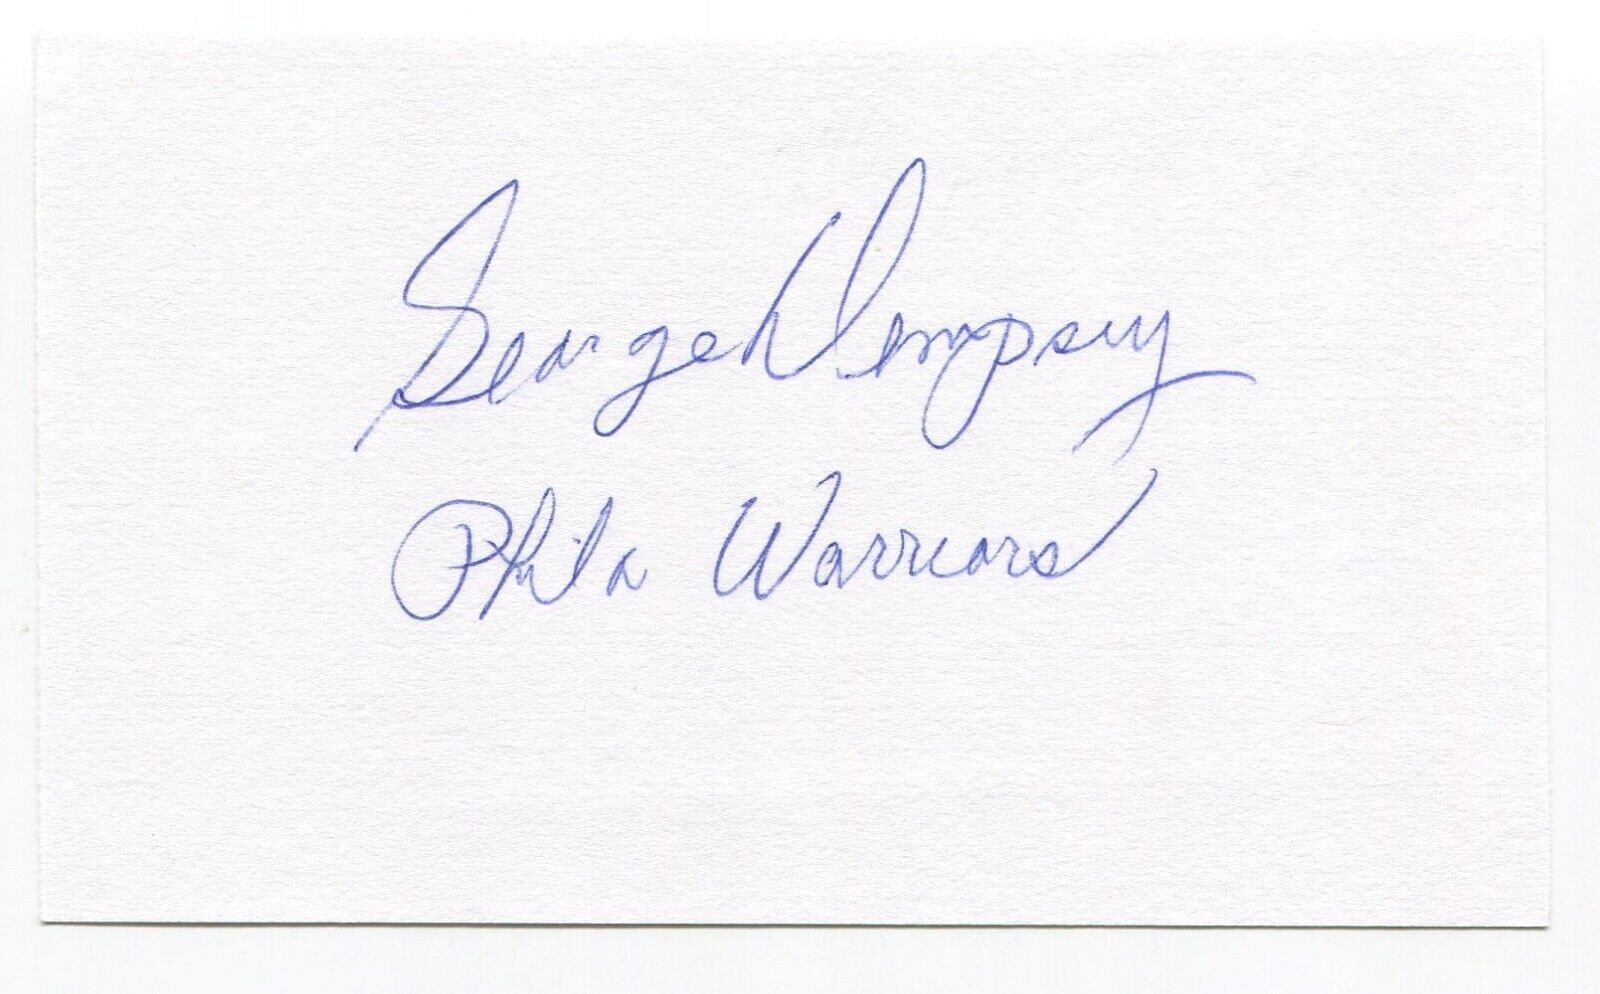 George Dempsey Signed 3x5 Index Card Autographed Nba Basketball Warriors